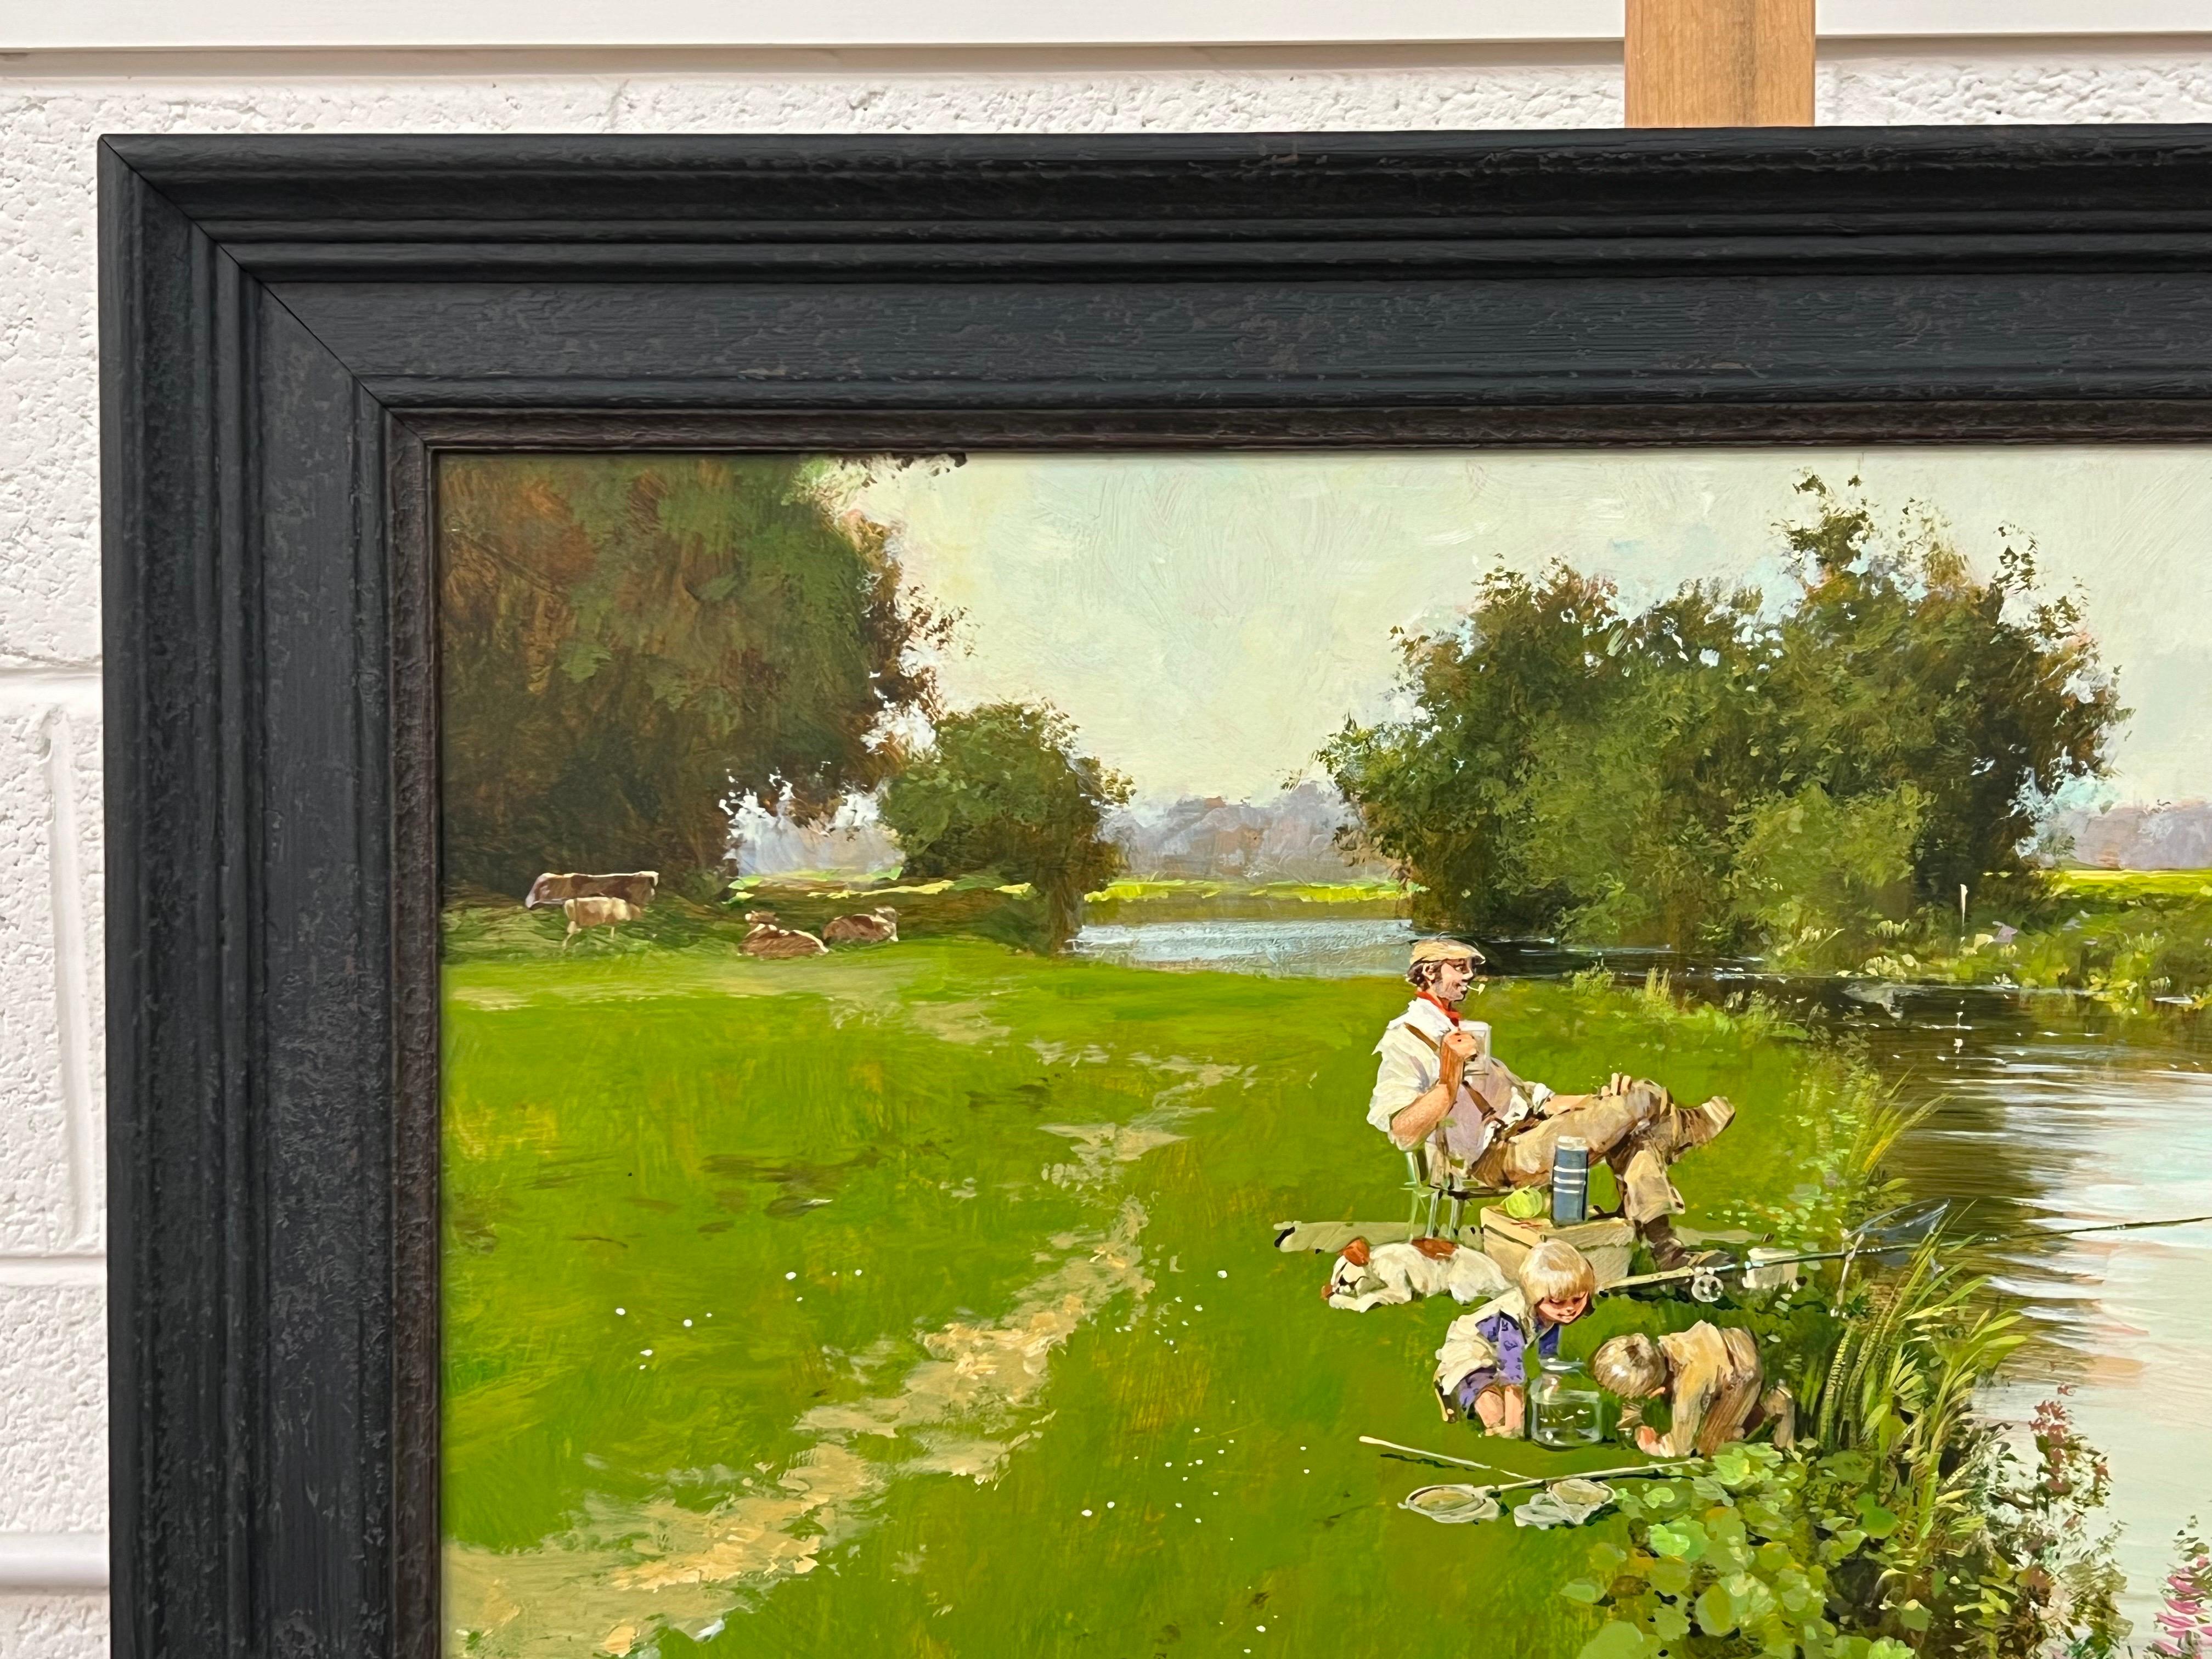 Man Fishing with Children Playing at a River Side in the English Countryside For Sale 1